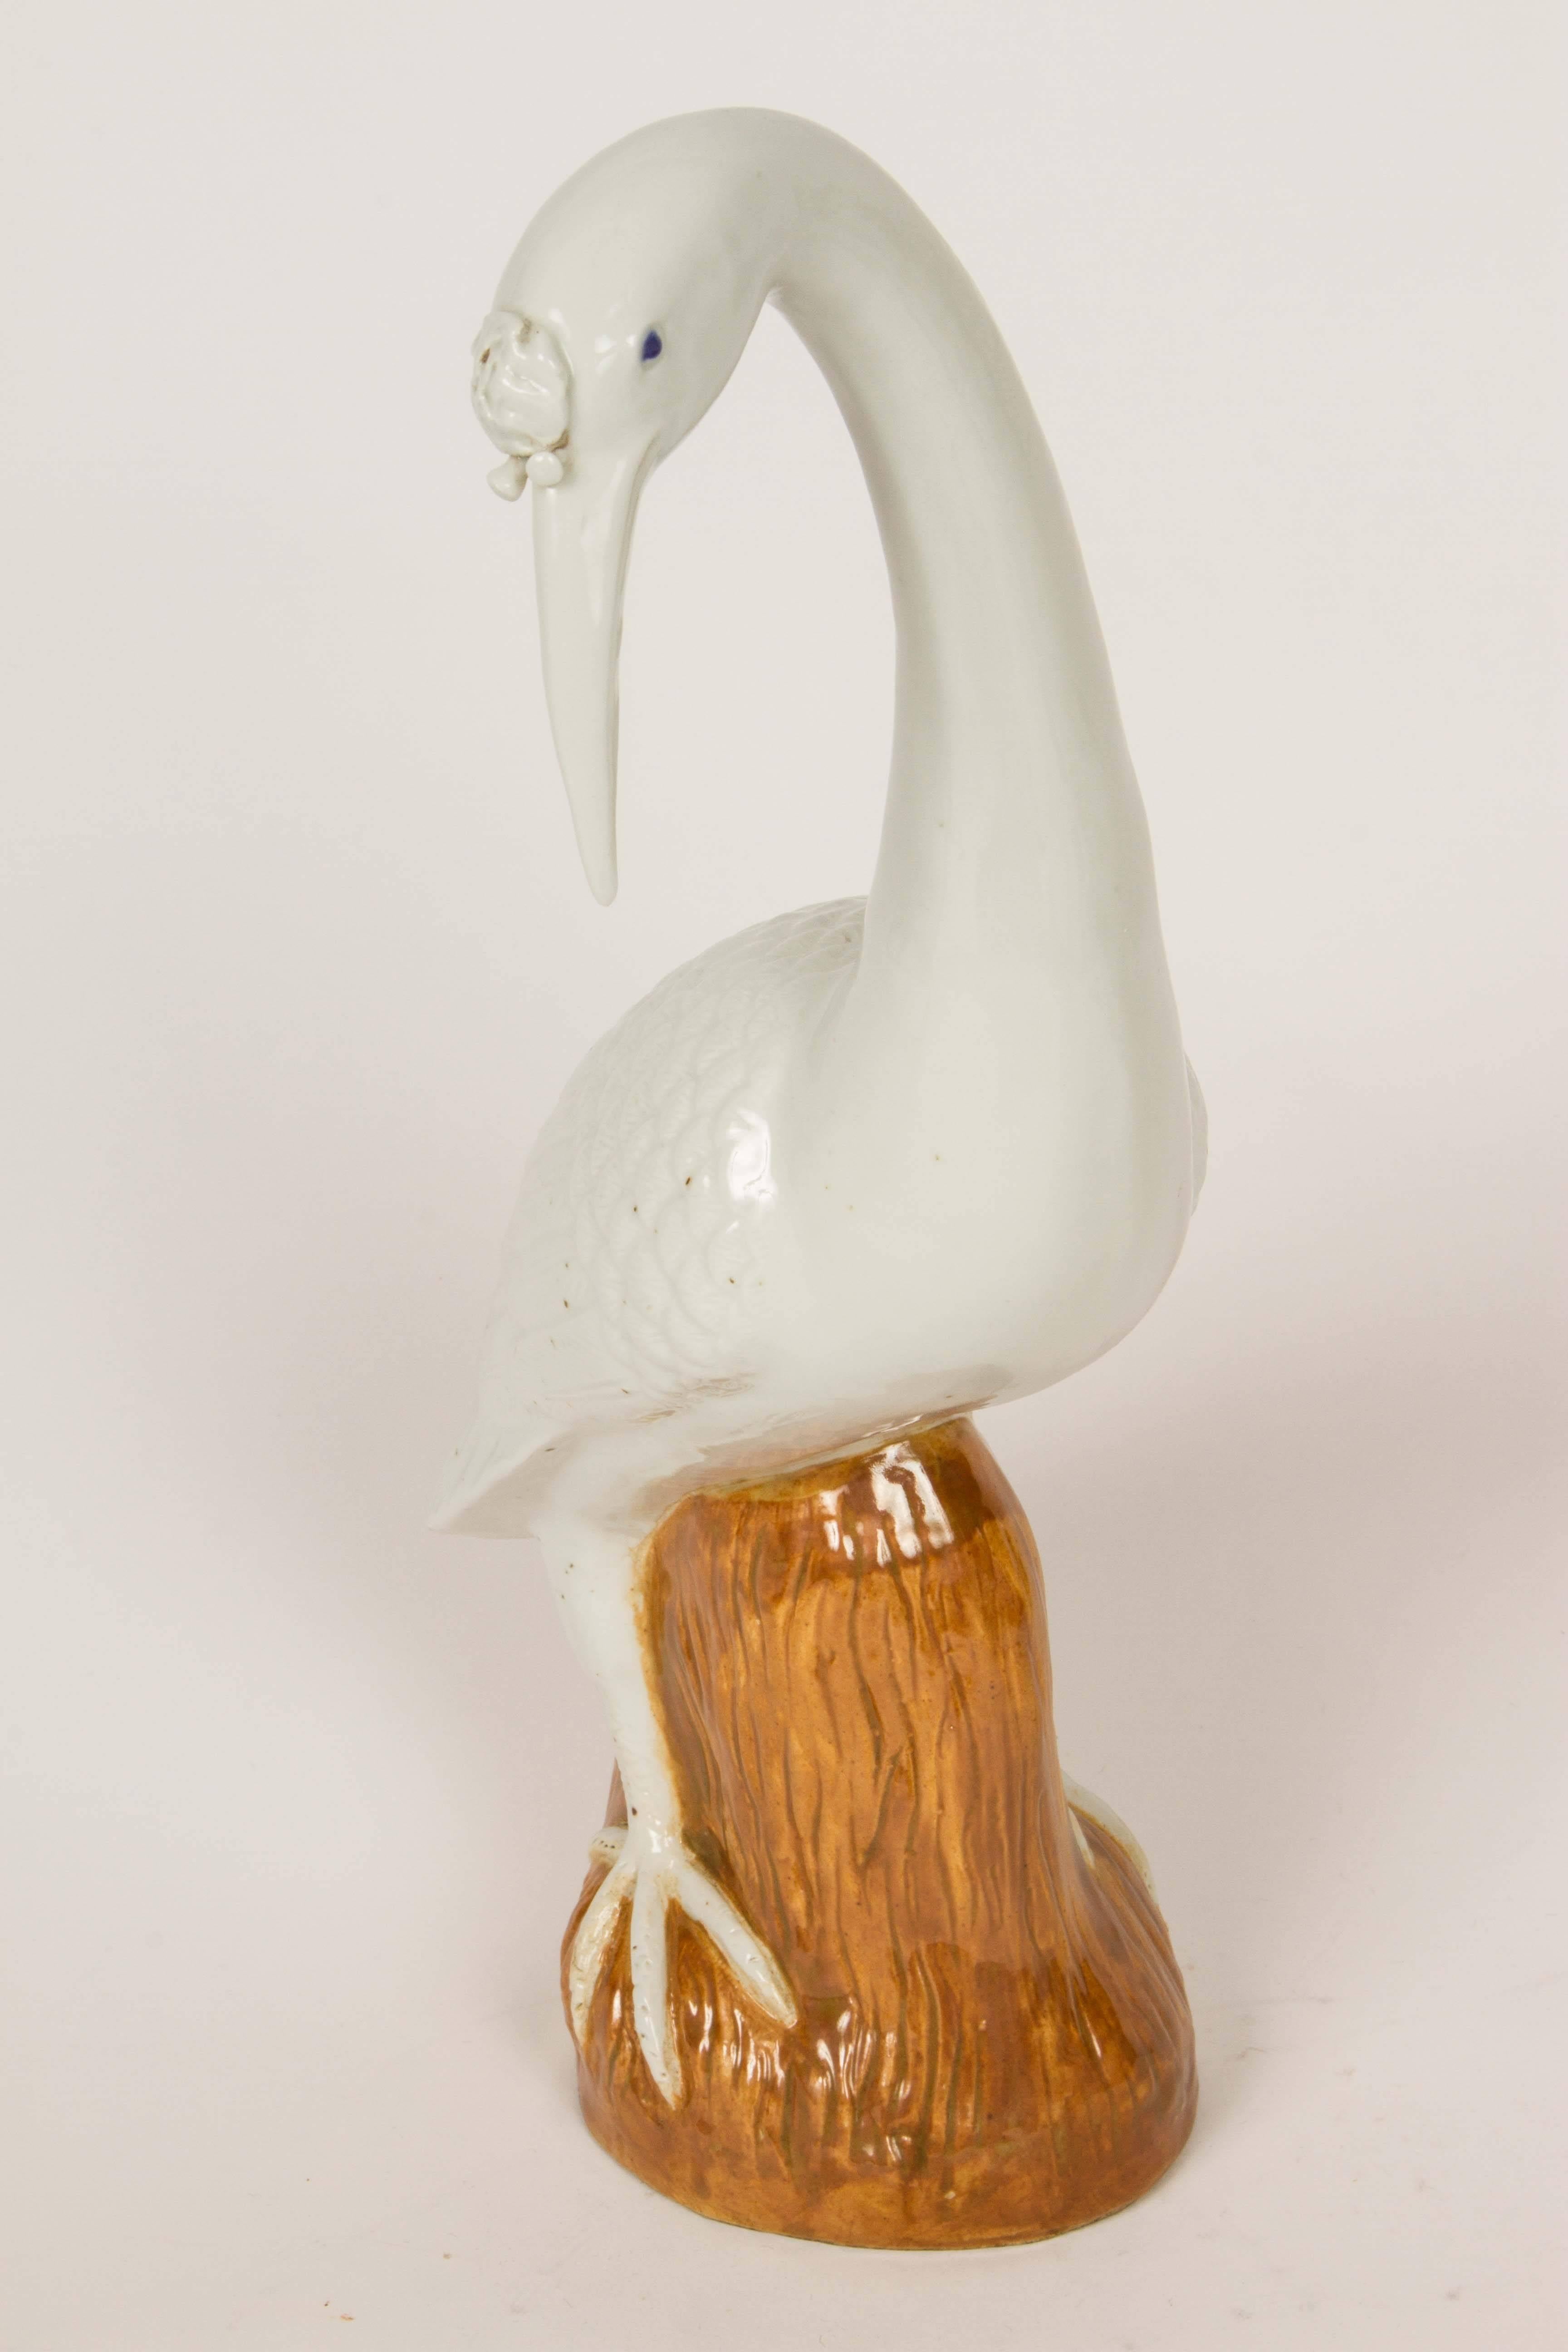 Very elegant group of decorative, painted porcelain egrets. There is some speckling to the glaze and bases are hollow and unsigned. Of typical Chinese form.